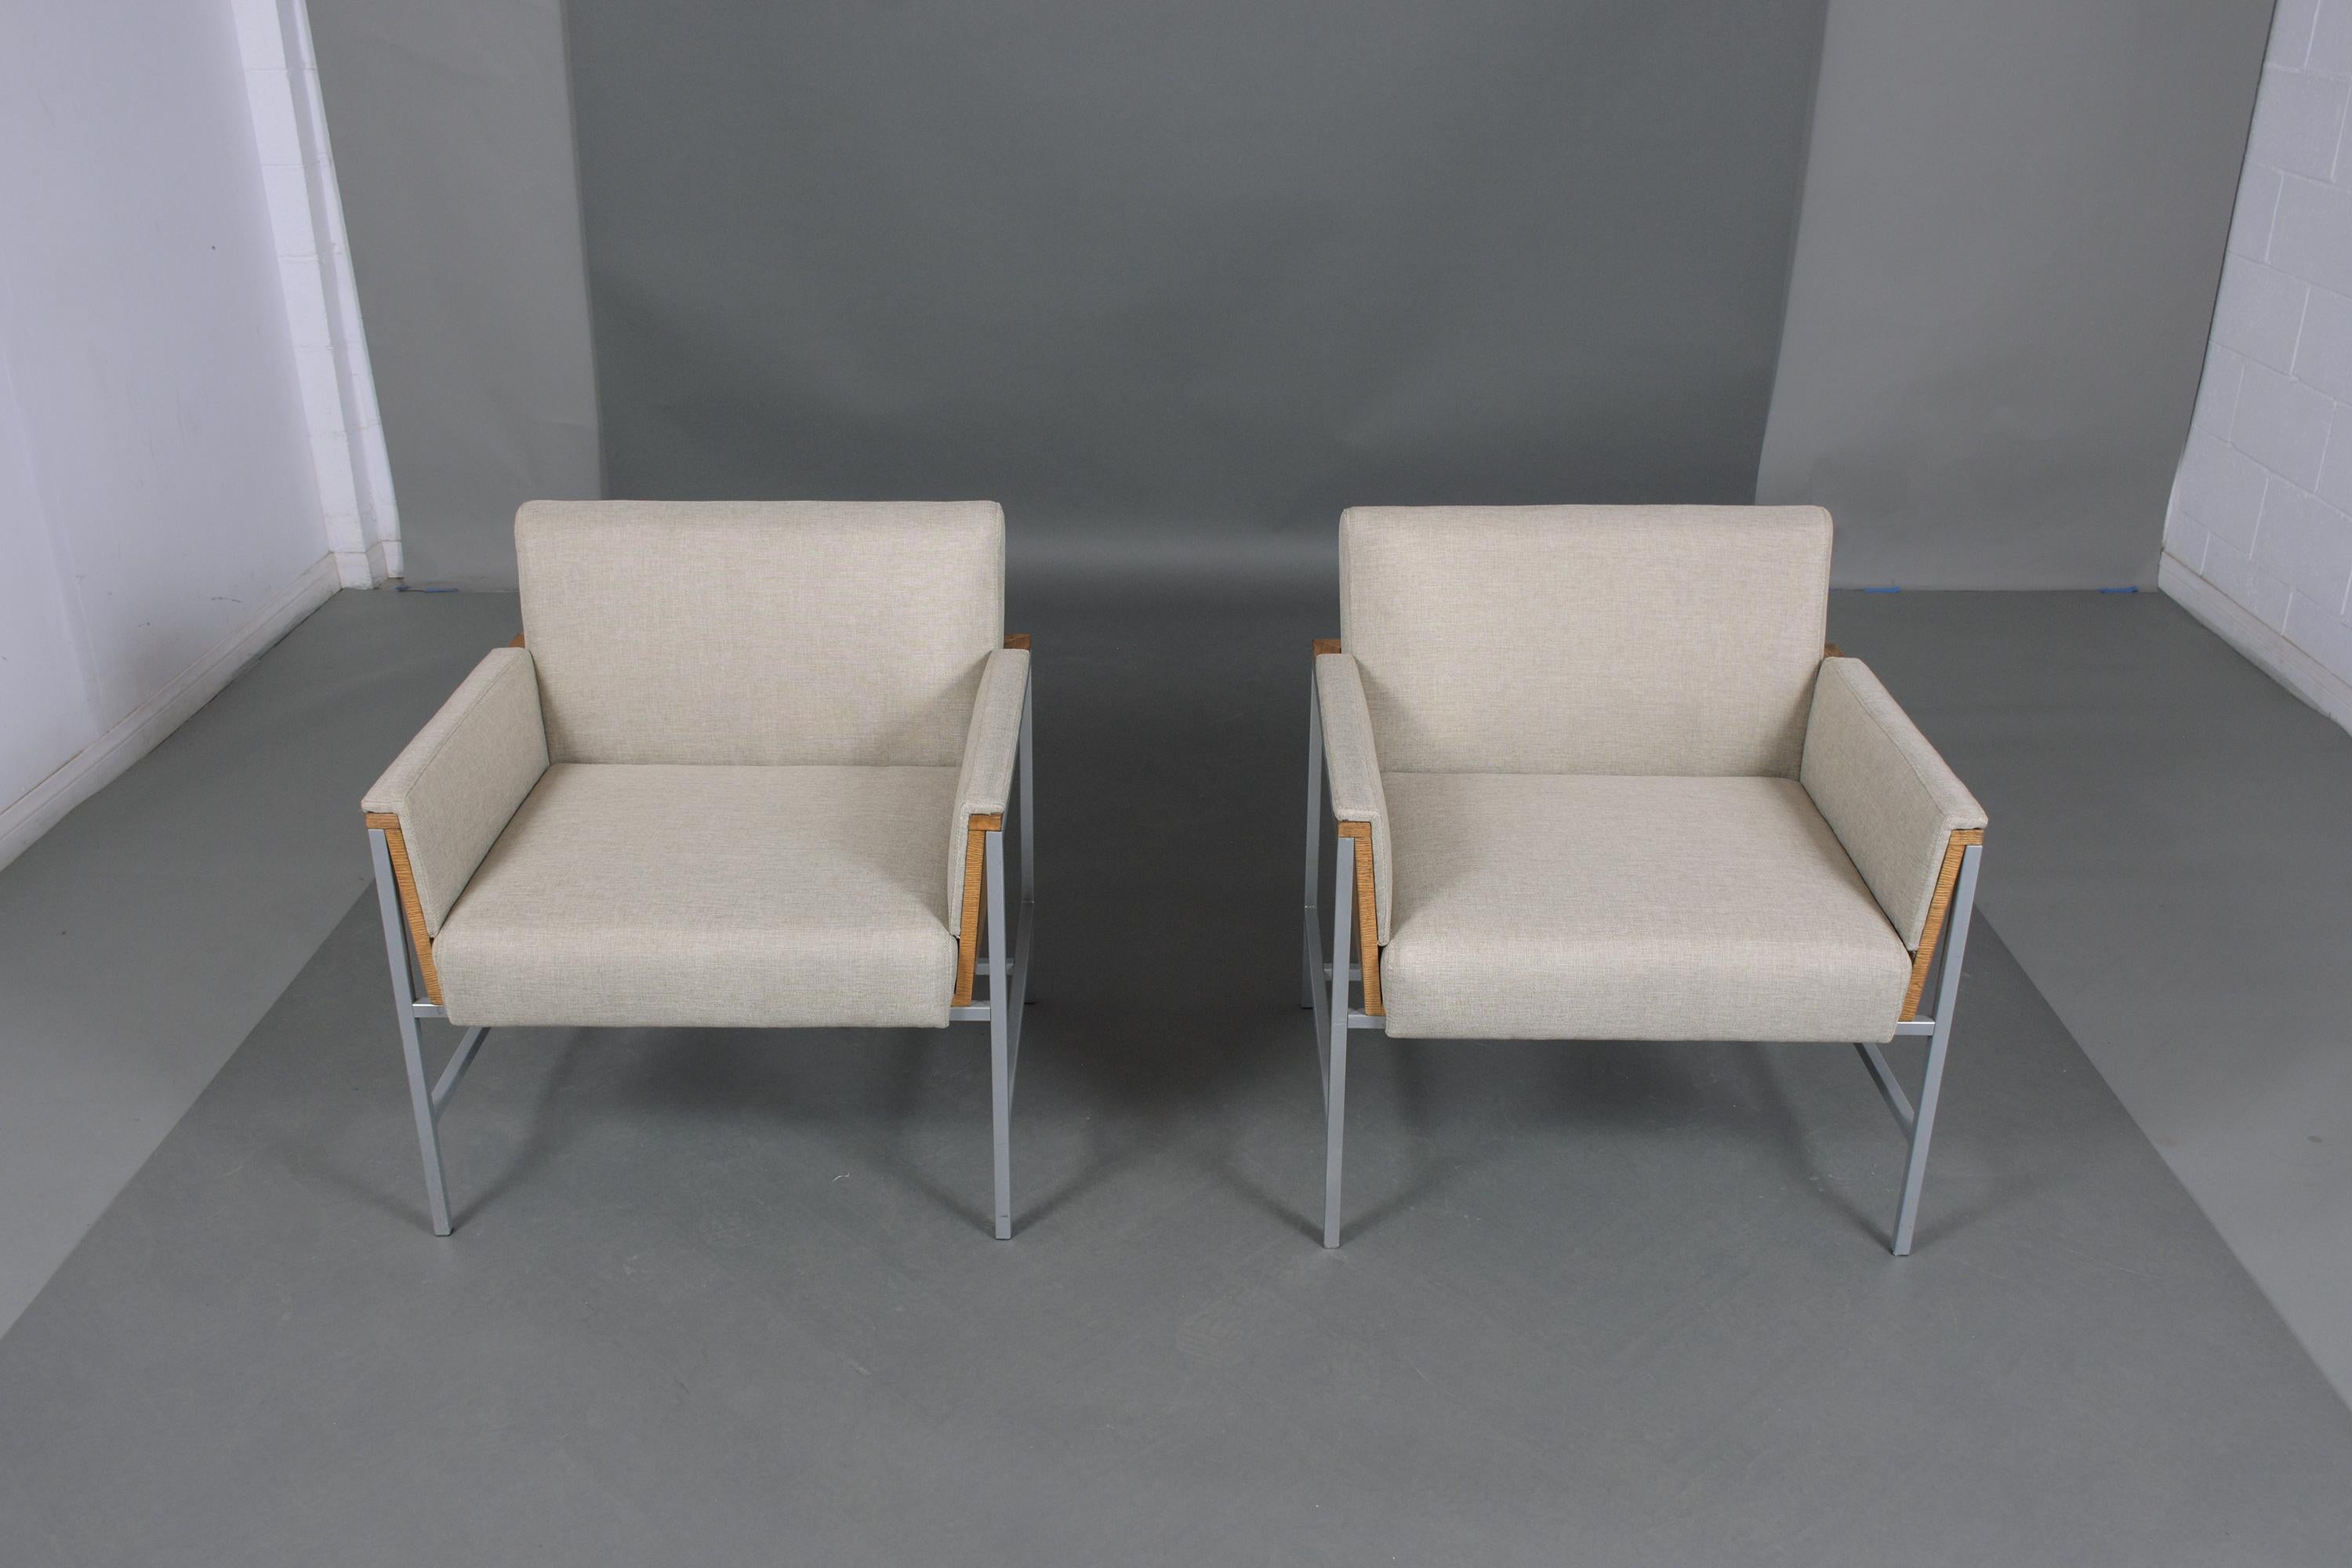 Hand-Crafted Pair of Mid-Century Modern Club Chairs